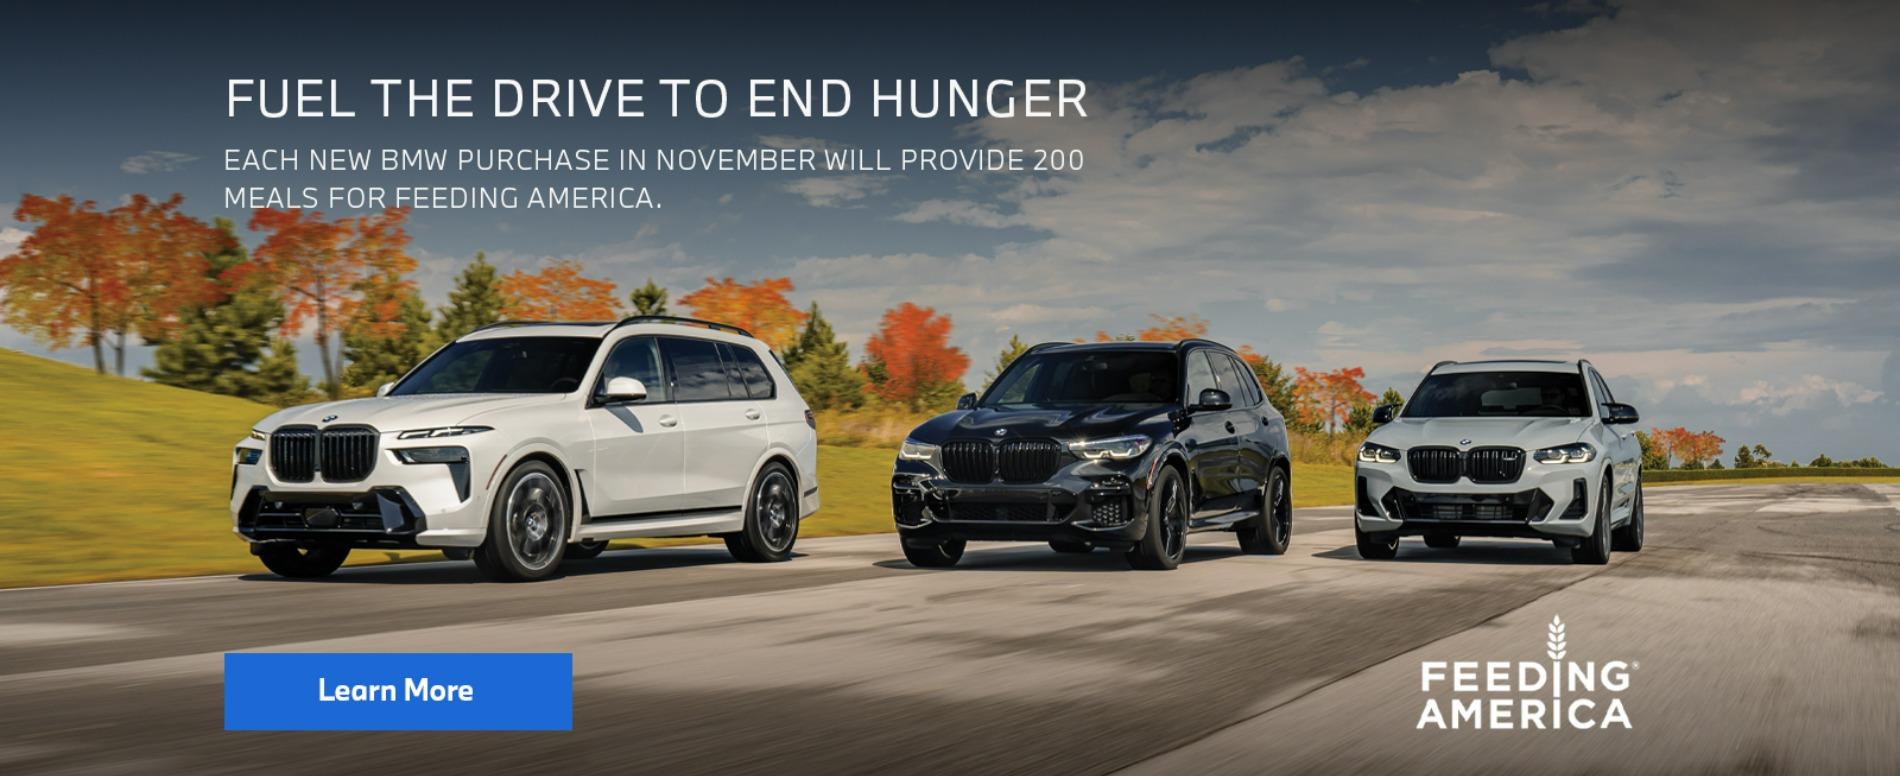 BMW Drive to End Hunger. Each new BMW purchase in November will provide 200 meals for Feeding America.